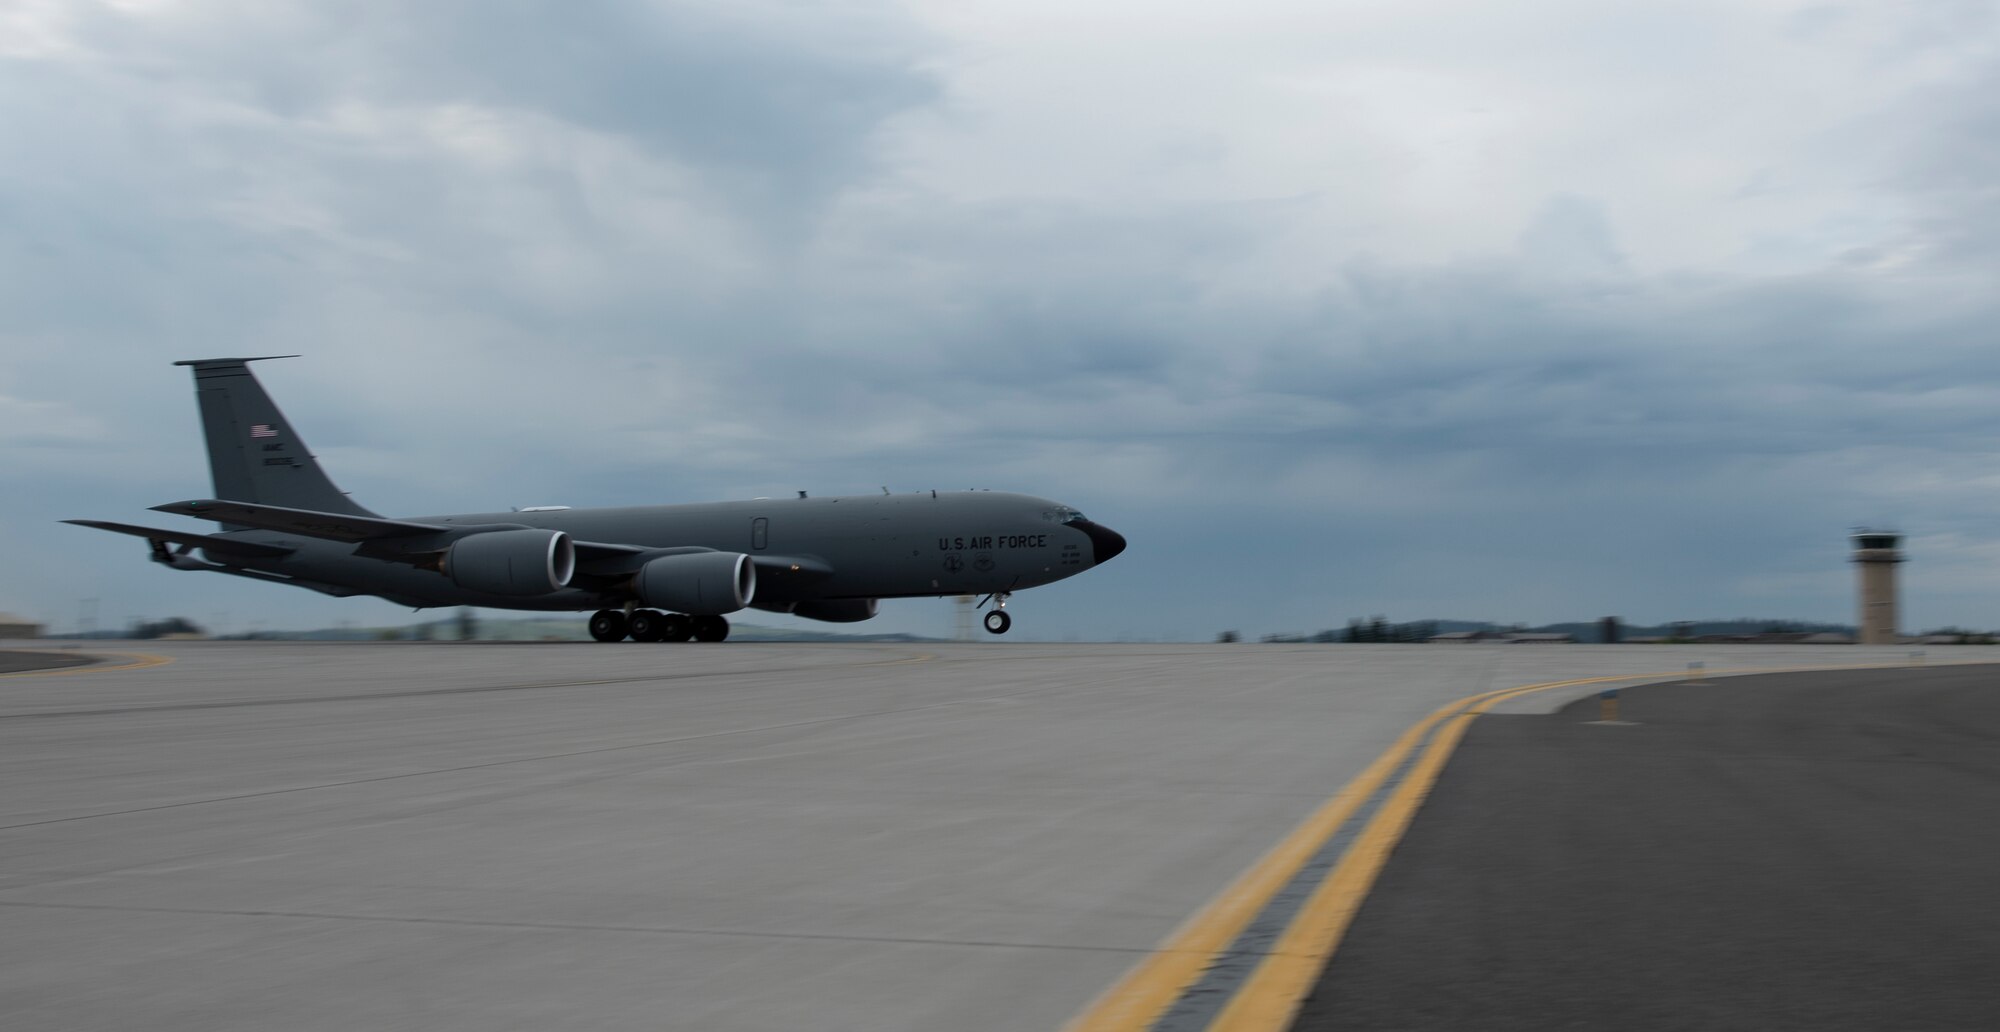 A KC-135 Stratotanker assigned to the 92nd Air Refueling Wing takes off from the flight line as part of Operation Centennial Contact at Fairchild Air force Base, Washington, June 27, 2023. The movement, which included stops at Yellowstone National Park, Mount Rushmore and Glacier National Park, was part of Air Mobility Command’s celebration of 100 years air refueling operations and demonstrated the 92nd Air Refueling Wing’s global reach capabilities. Since its inception in 1923, Air refueling has become a crucial component of military and civilian aviation operations around the world by extending the range and endurance of aircraft and enabling them to complete missions that would otherwise be impossible or require multiple stops. As a result, this capability is essential for strategic and tactical operations, as well as humanitarian relief efforts in support of AMC, U.S. Transportation Command and Department of Defense priorities. (U.S. Air Force photo by Tech. Sgt. Michael Brown)